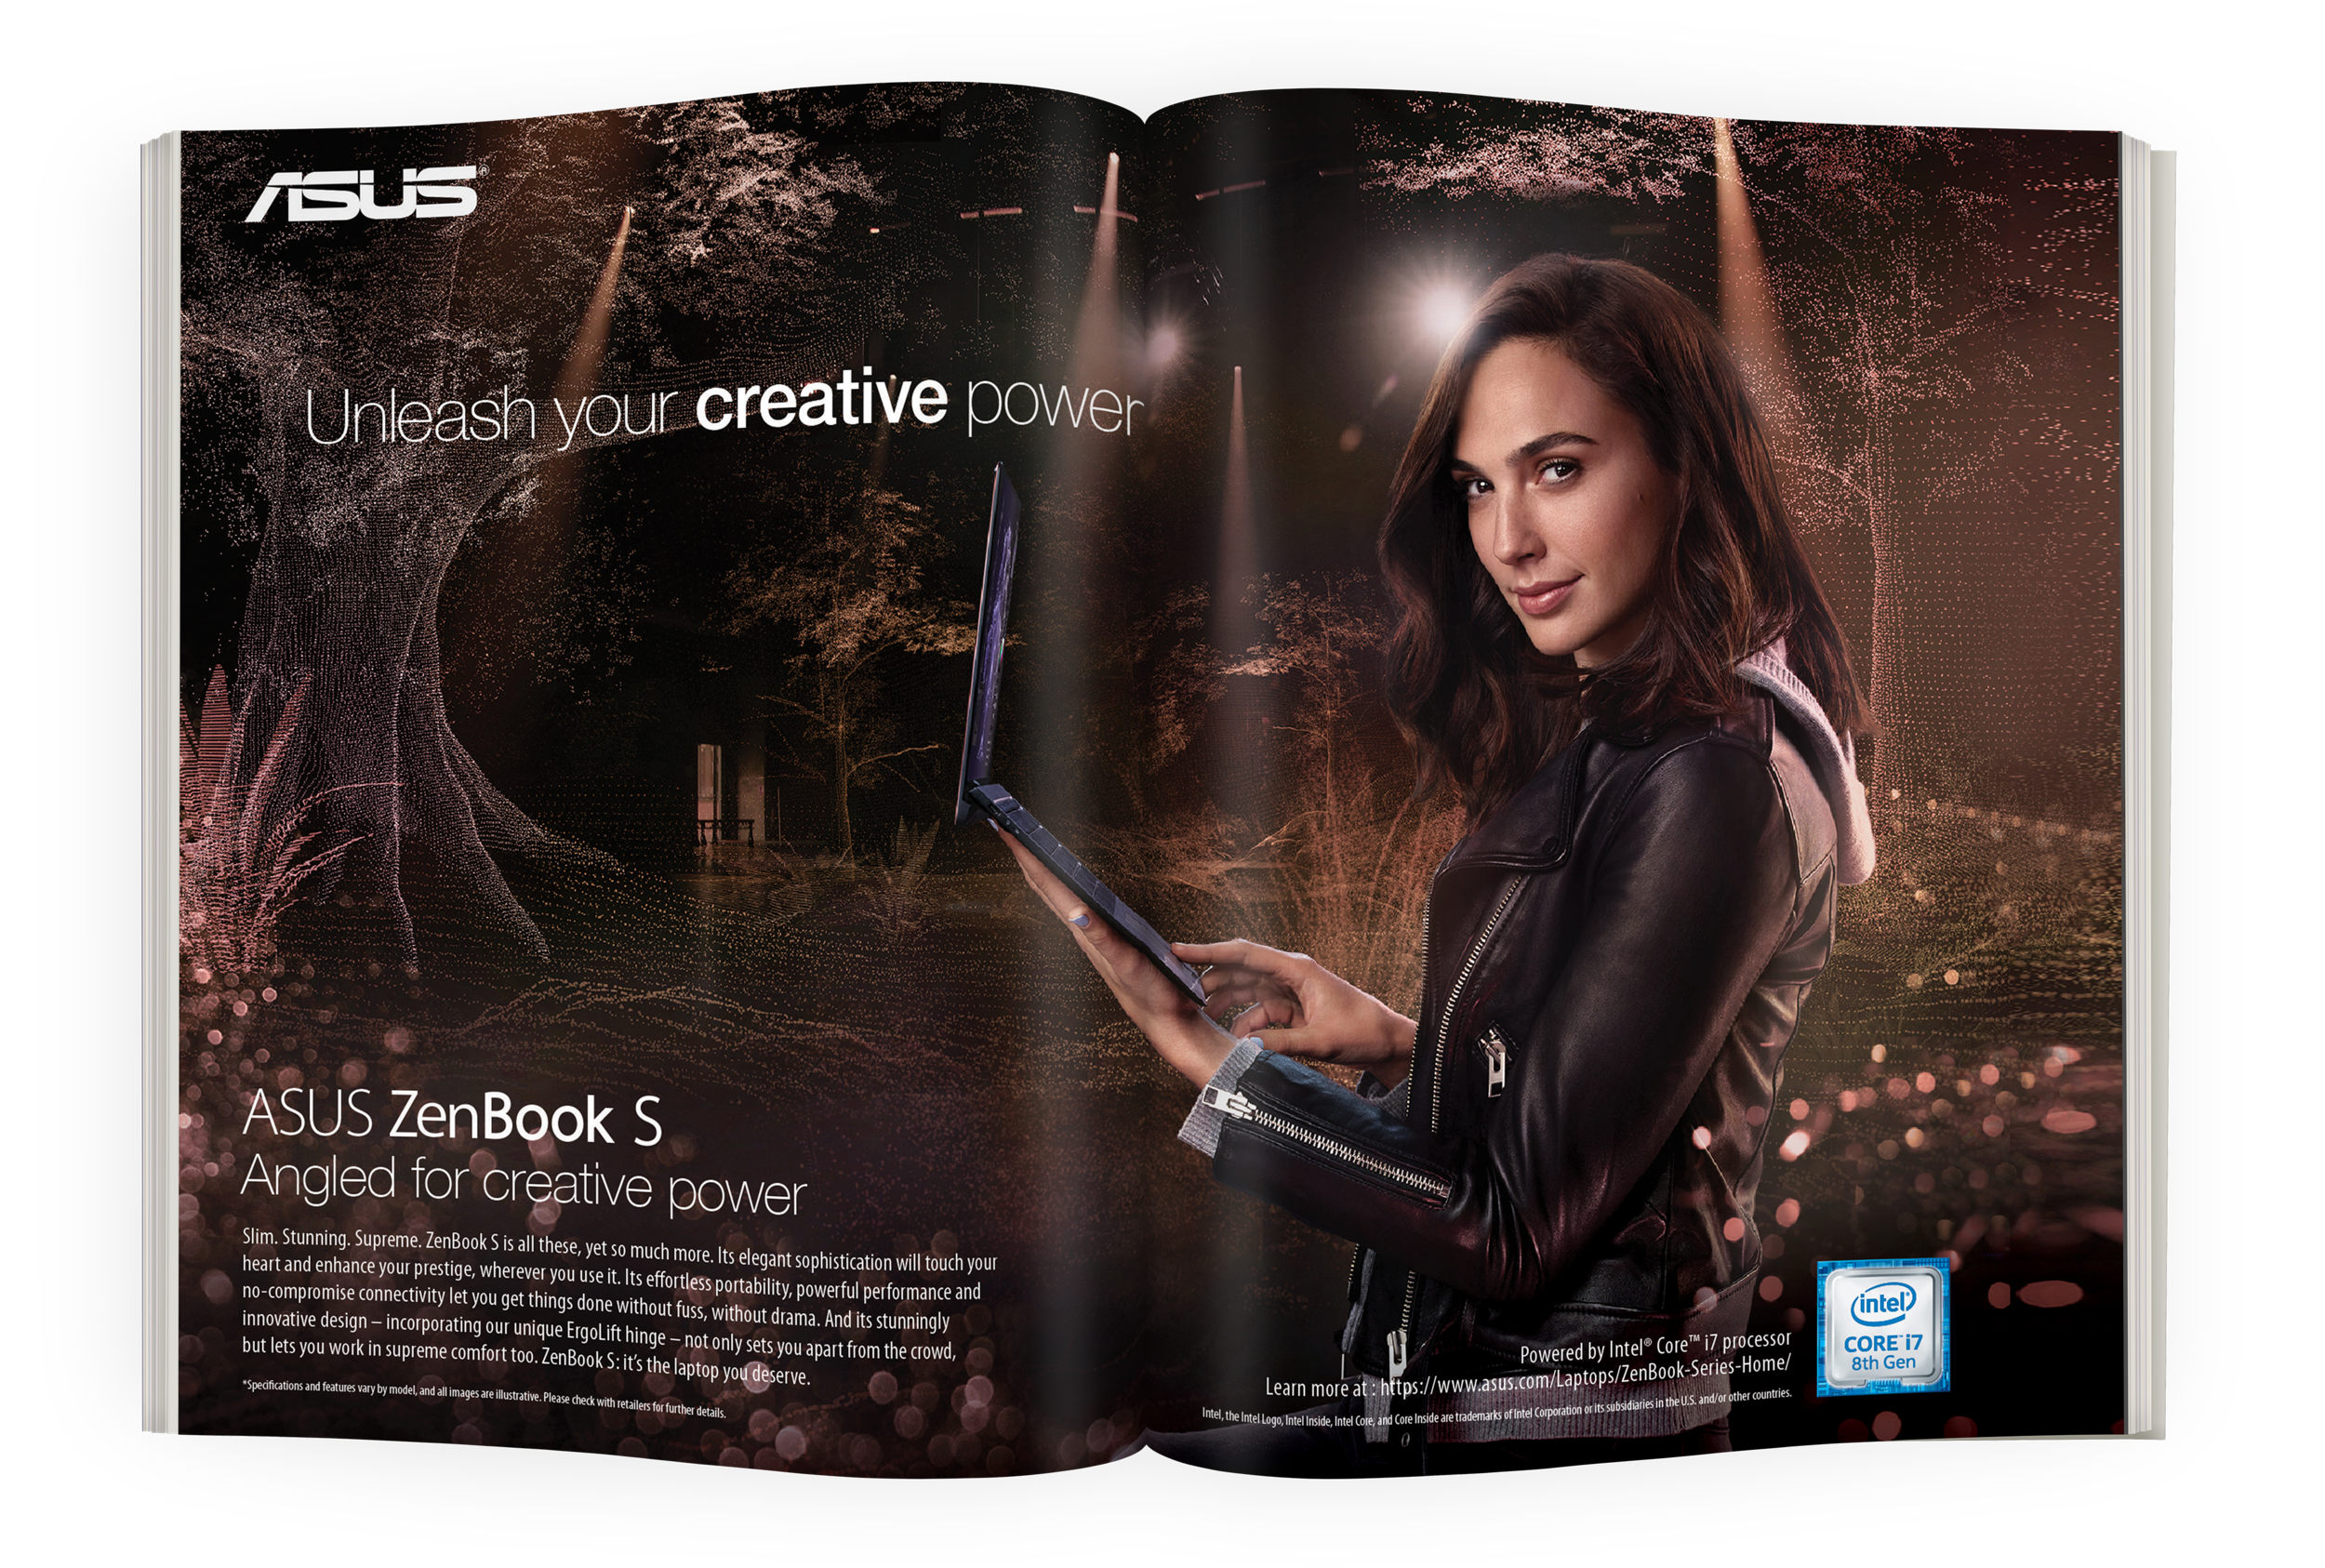  the ZenBook visuals portray Gal in the middle of her creative process.  